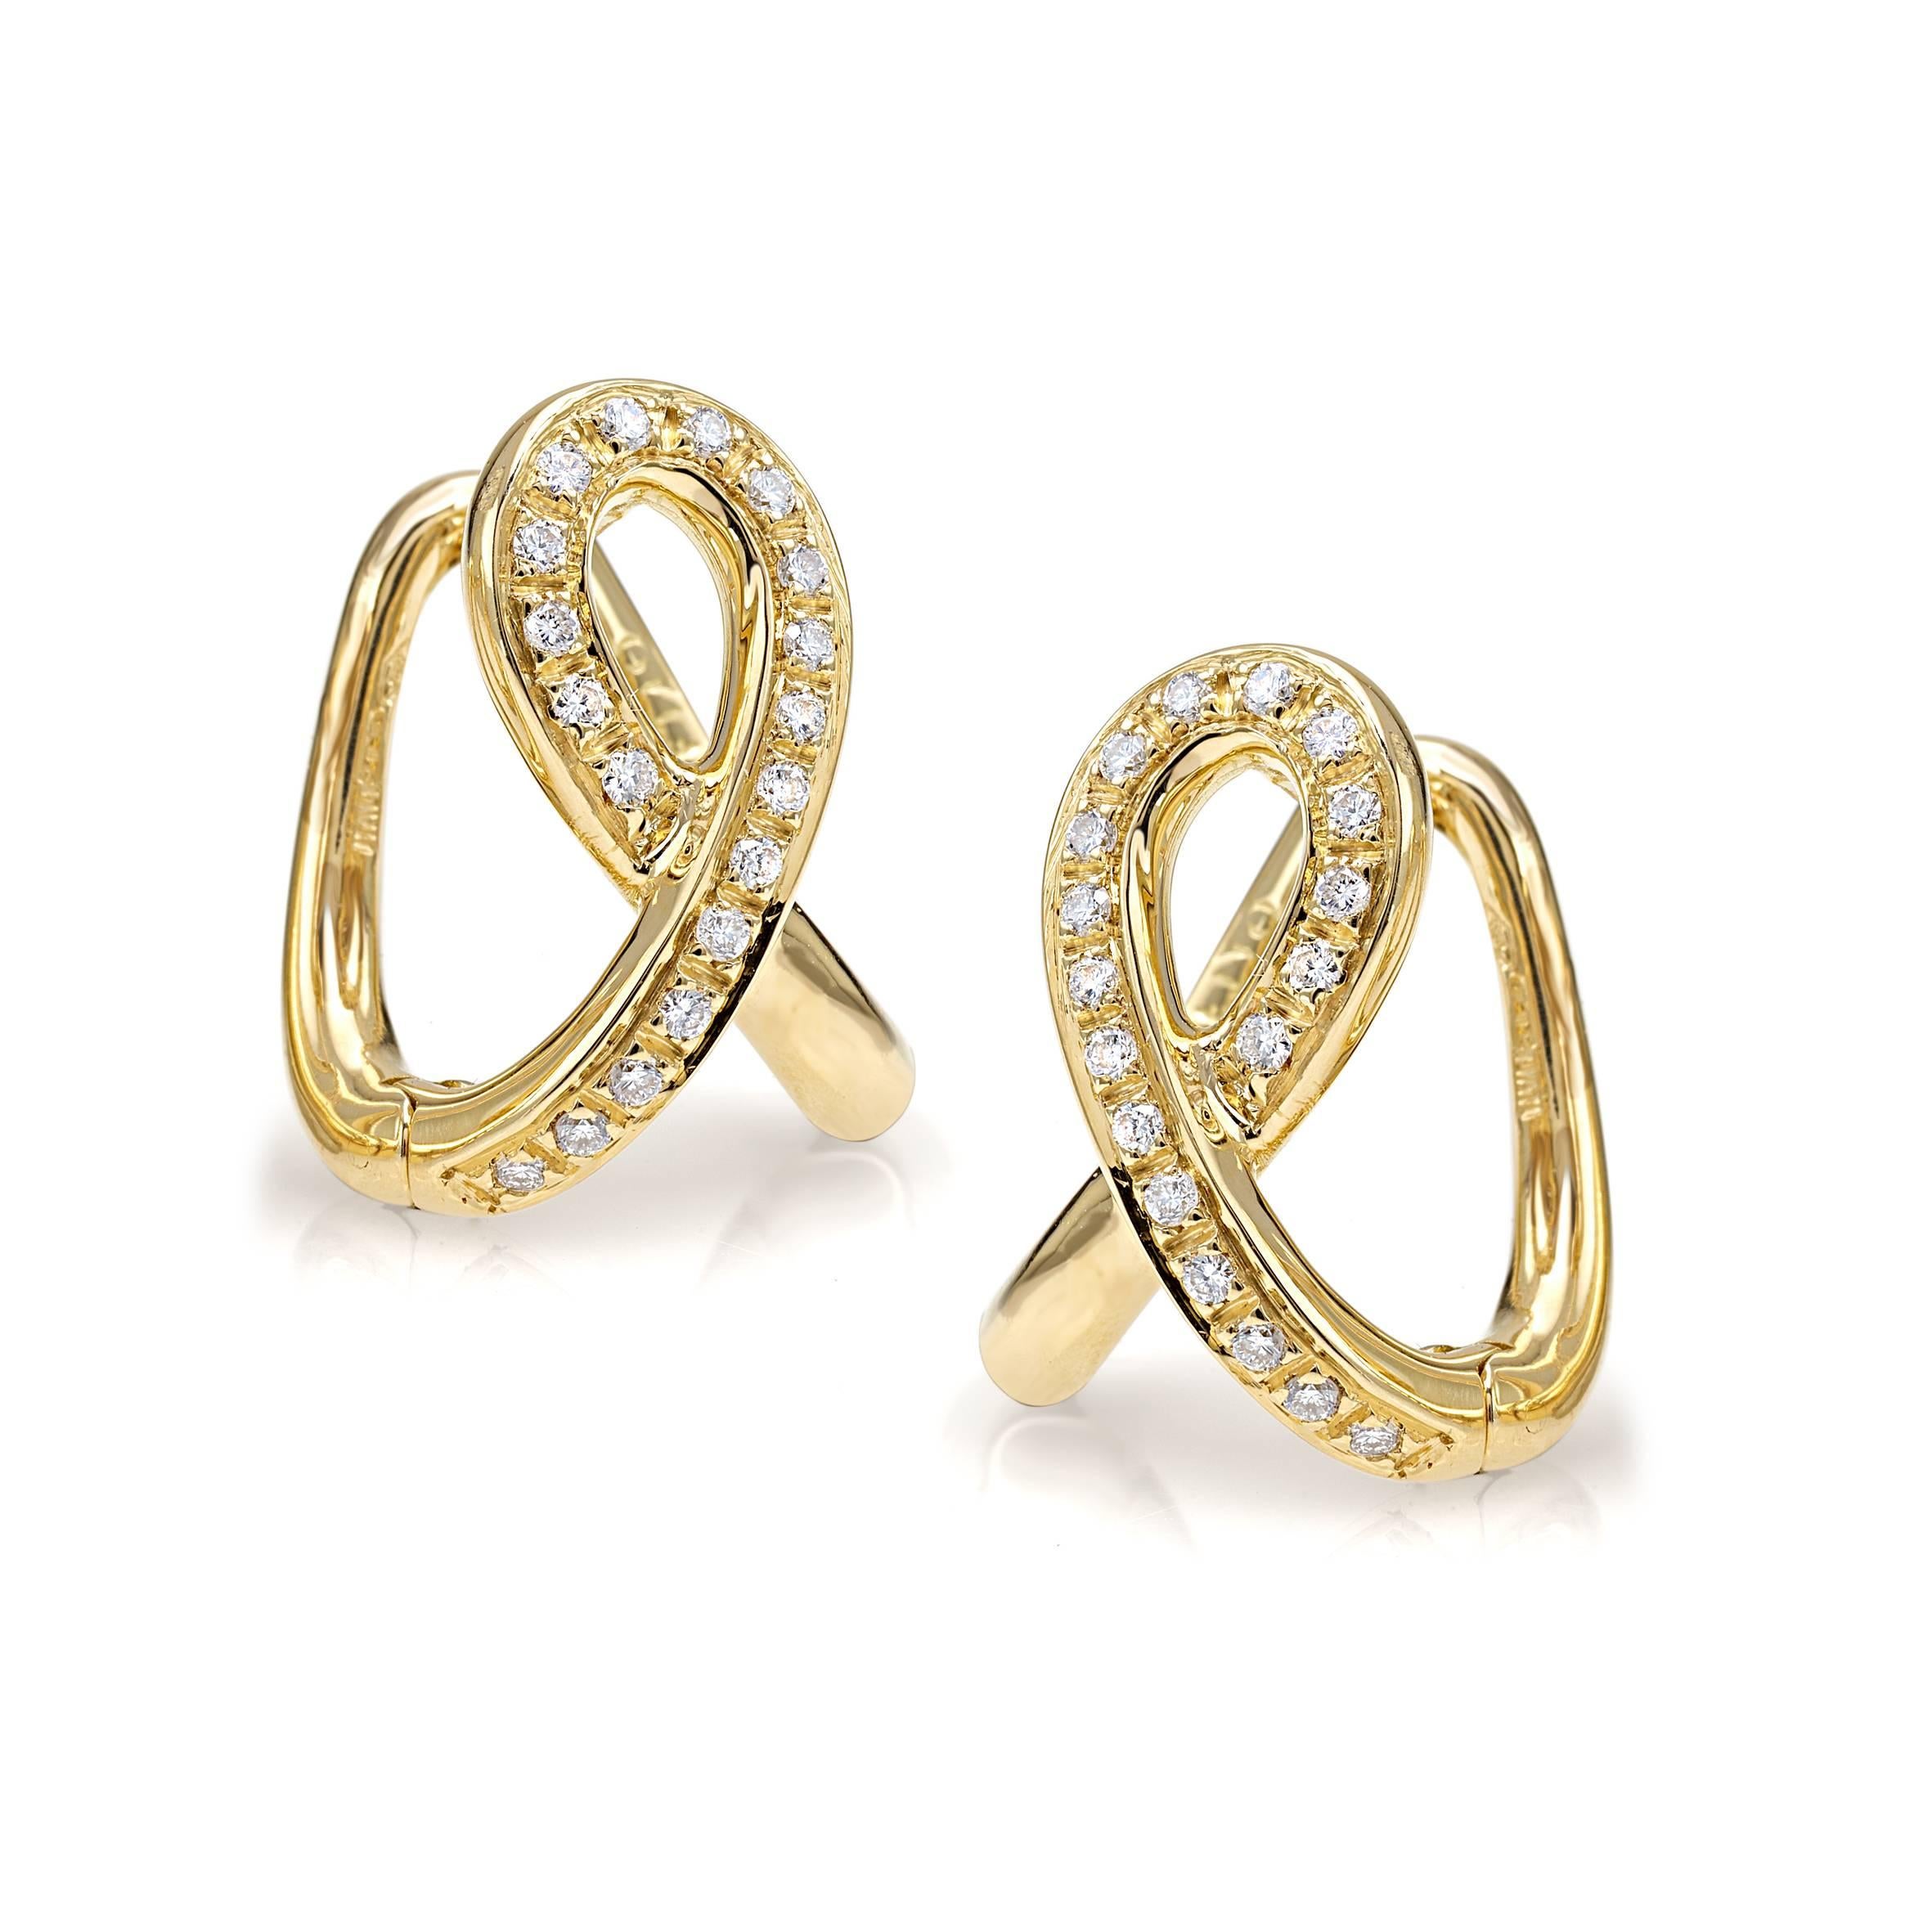 Essence earrings in 18 kt  white gold and white diamonds 
This classic collection in Micheletto tradition

the total weight of the gold is  gr 13.90
the total weight of the white diamonds is ct 0.36 - color GH clarity VVS1

STAMP: 10 MI ITALY